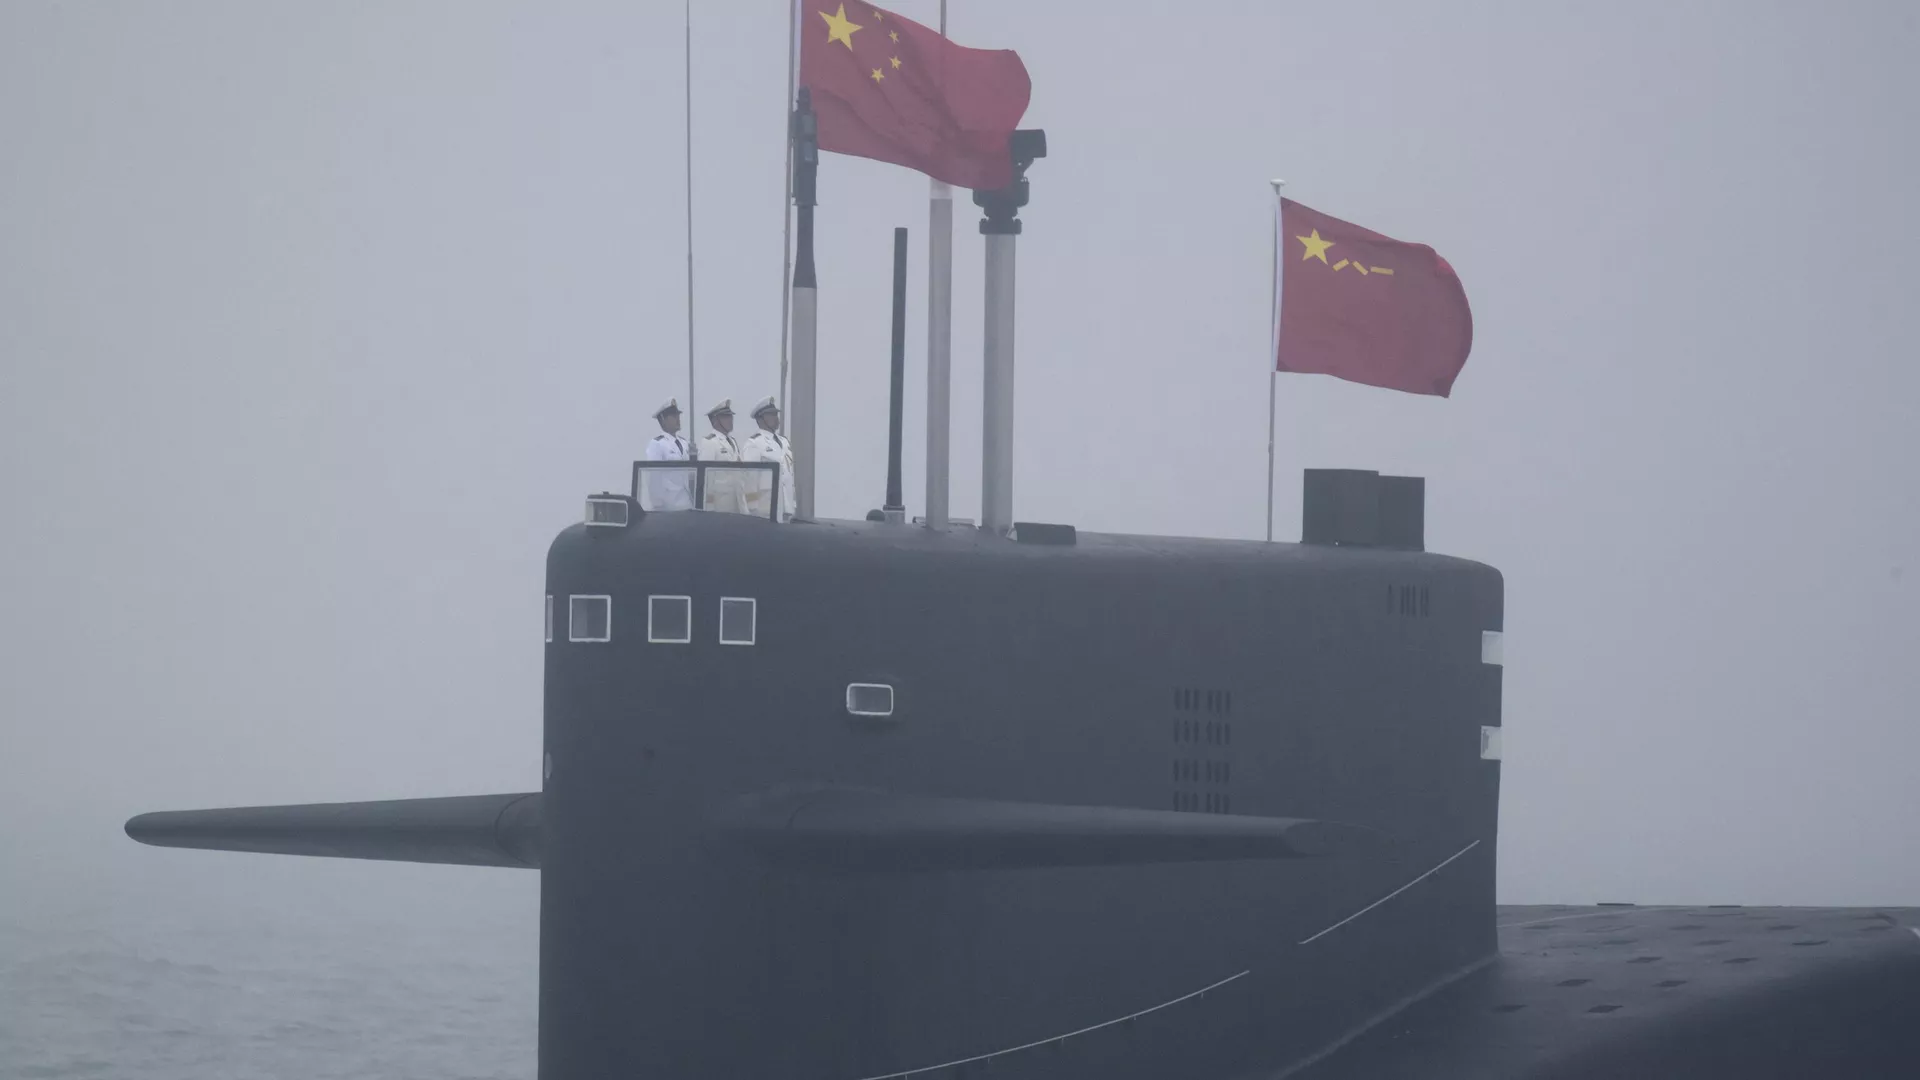 A type 094 Jin-class nuclear submarine Long March 15 of the Chinese People's Liberation Army (PLA) Navy participates in a naval parade to commemorate the 70th anniversary of the founding of China's PLA Navy in the sea near Qingdao, in eastern China's Shandong province on April 23, 2019. - Sputnik International, 1920, 21.11.2023